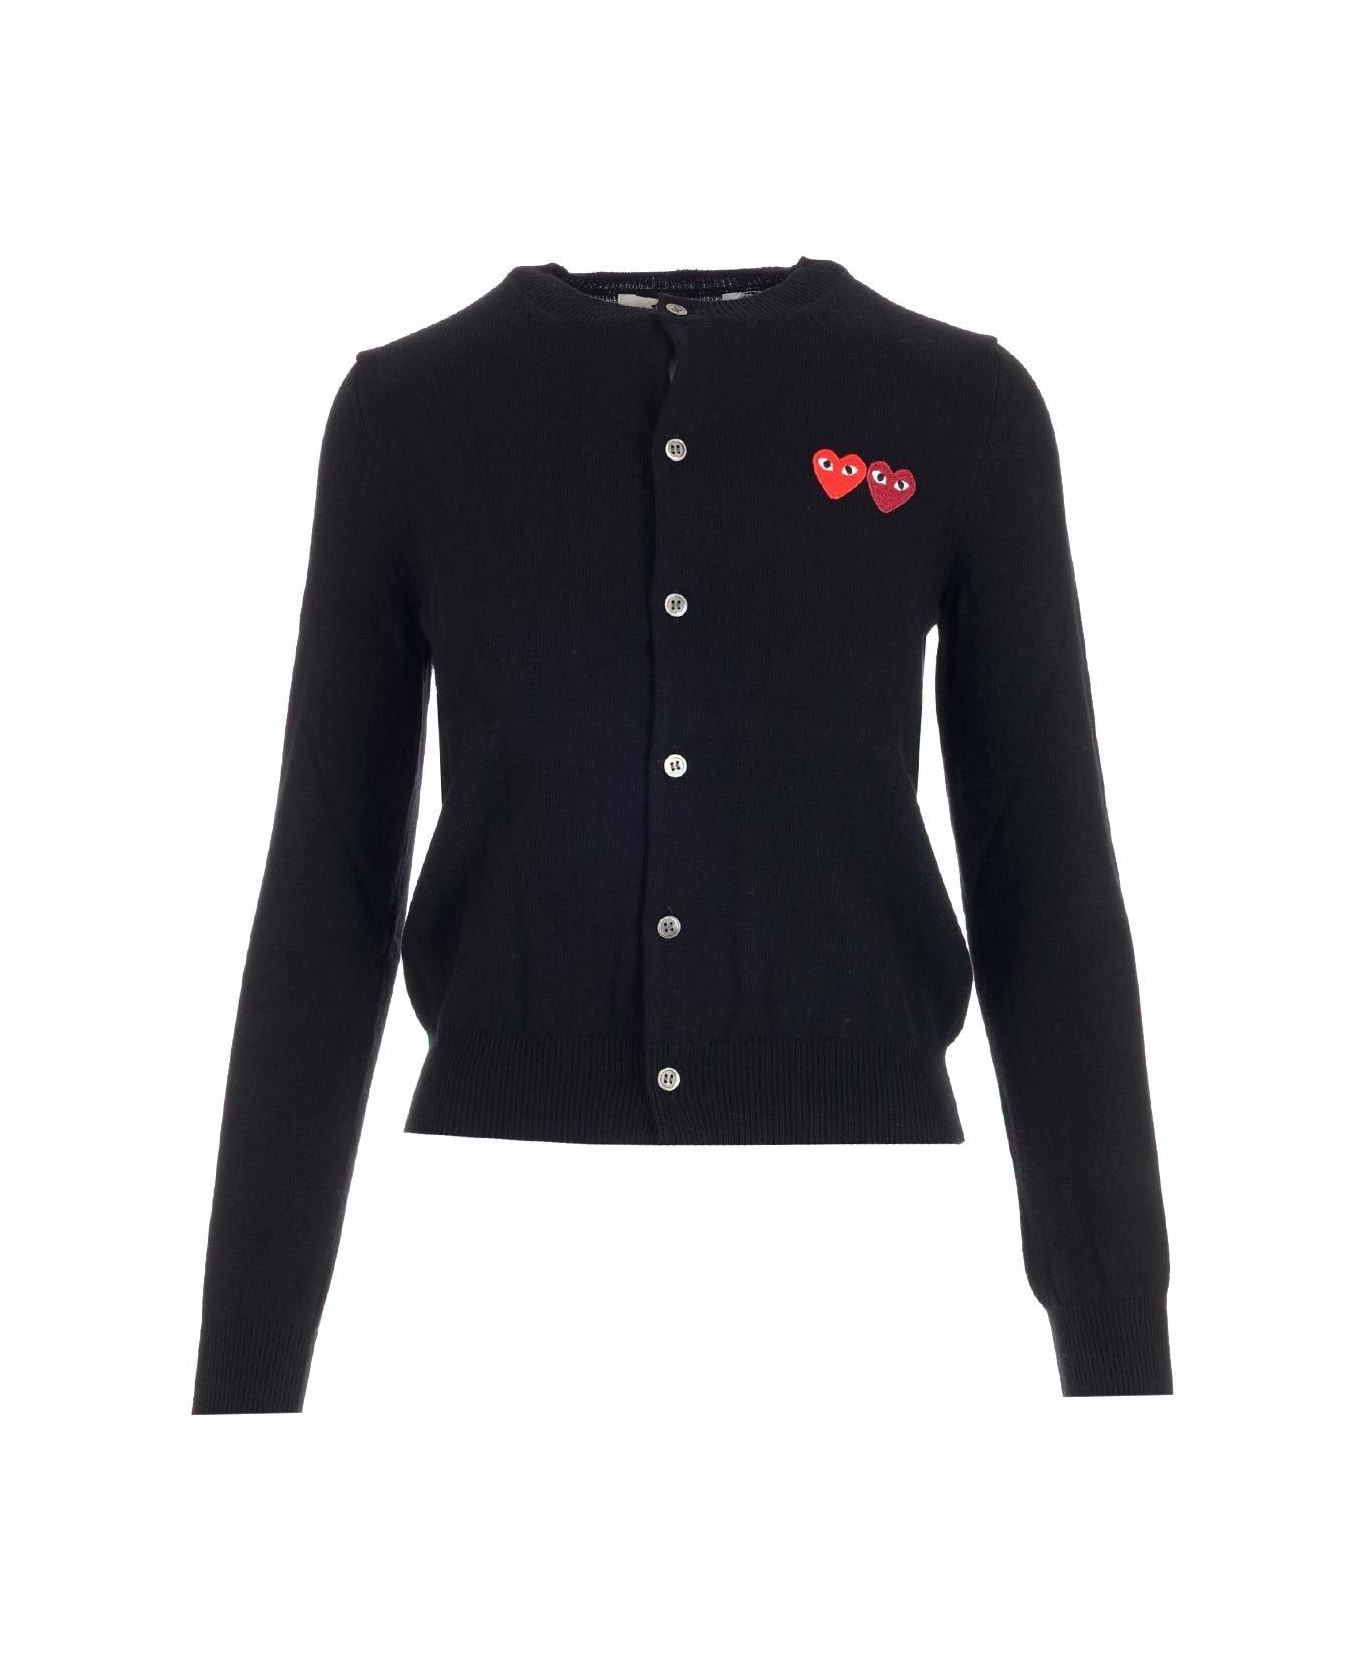 Comme des Garçons Play Logo Embroidered Buttoned Cardigan - Black